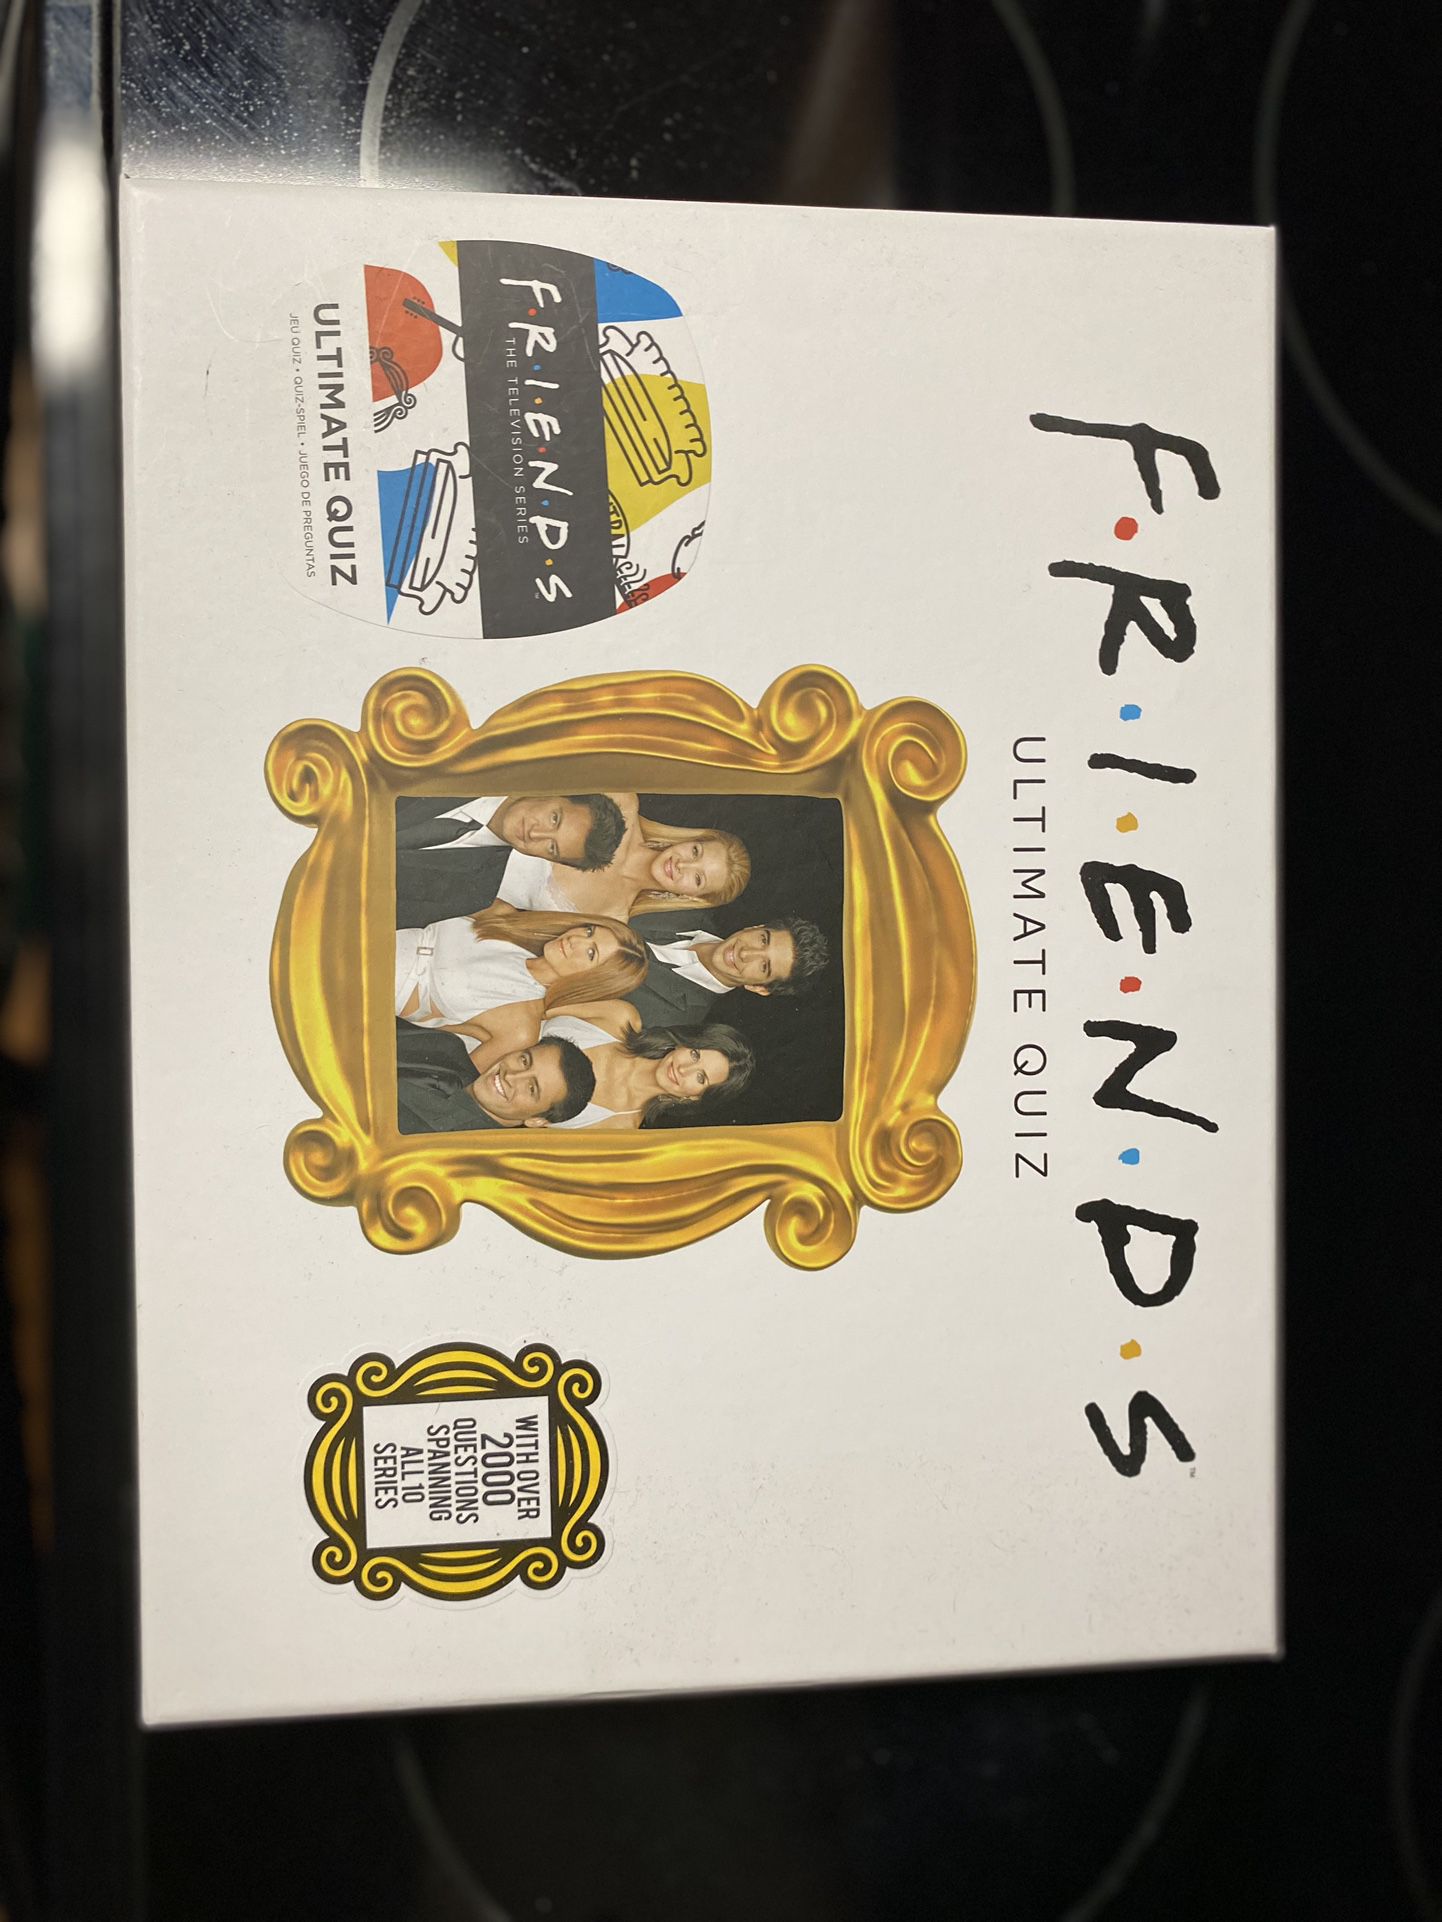 Friends TV Show Themed Trivia Game